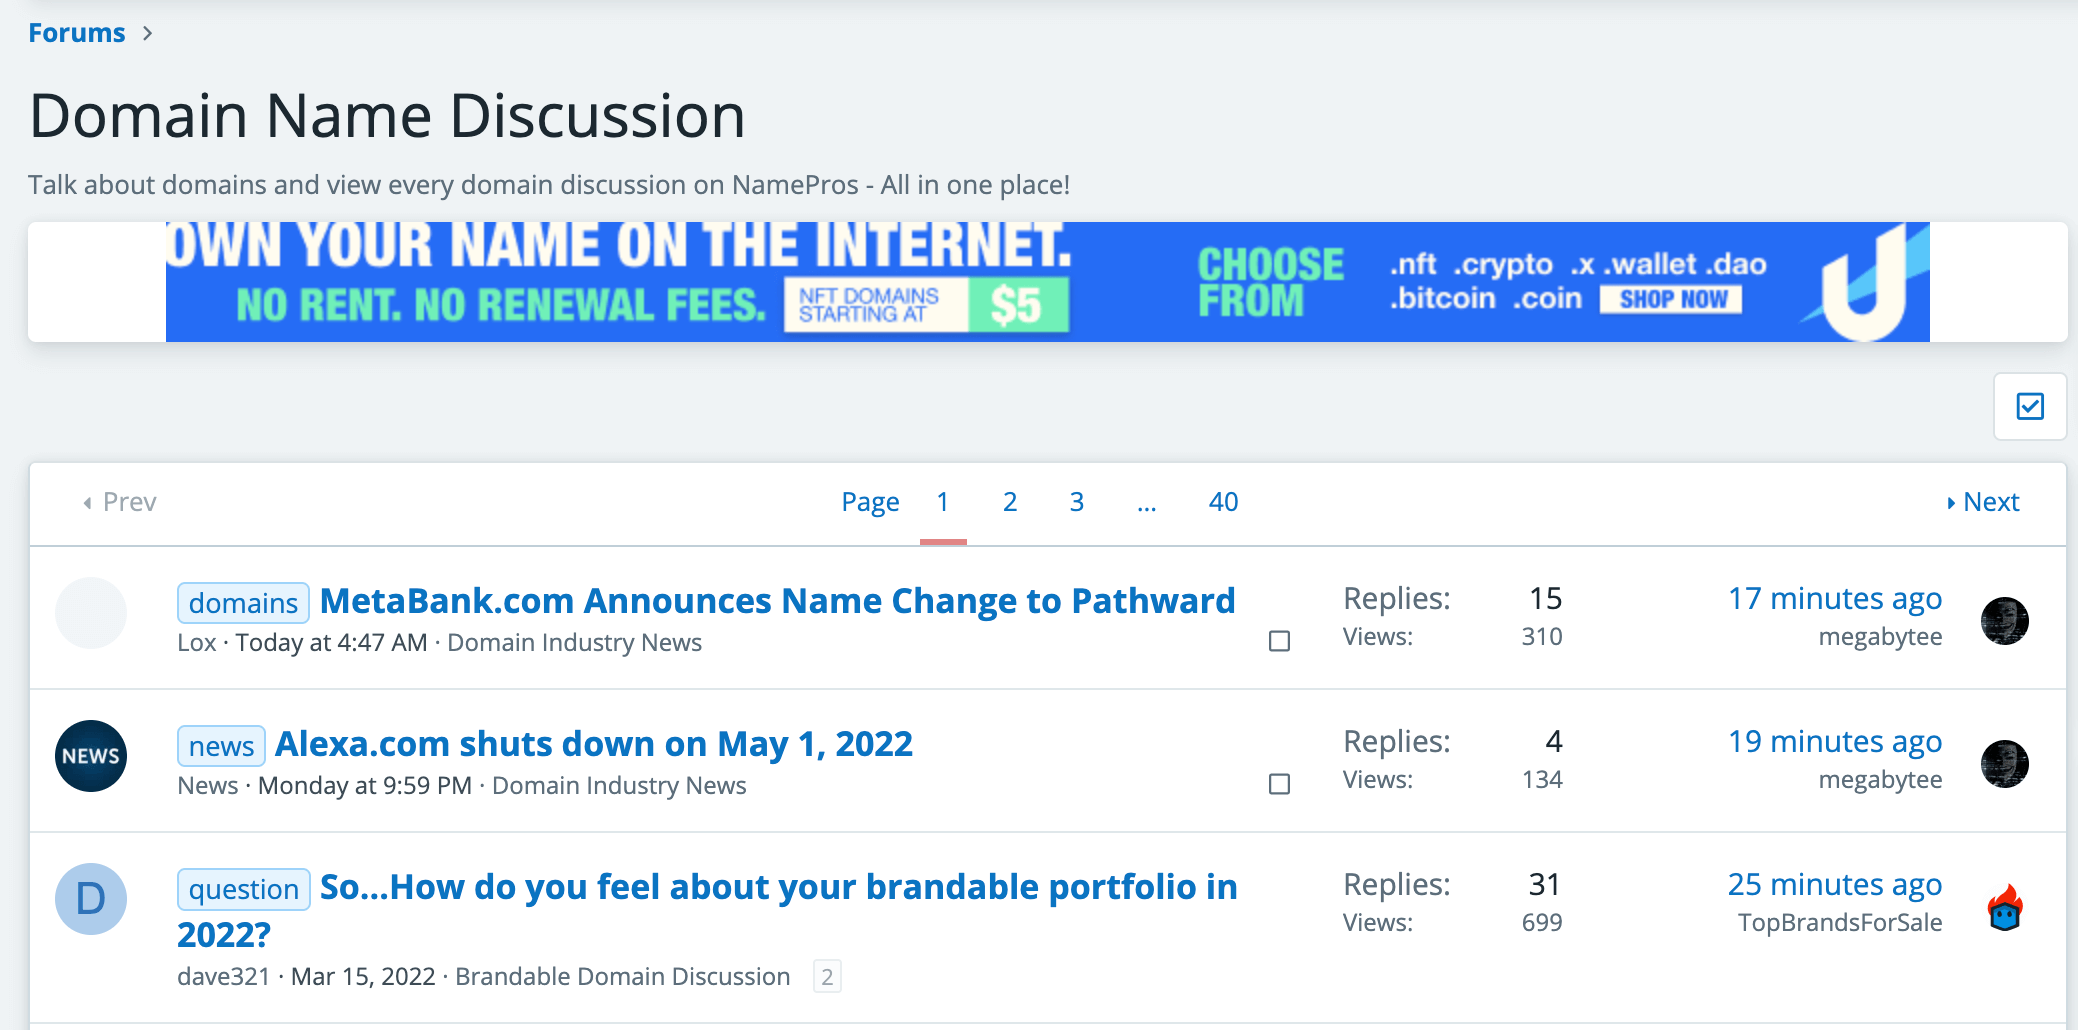 The Domain Name Discussion page